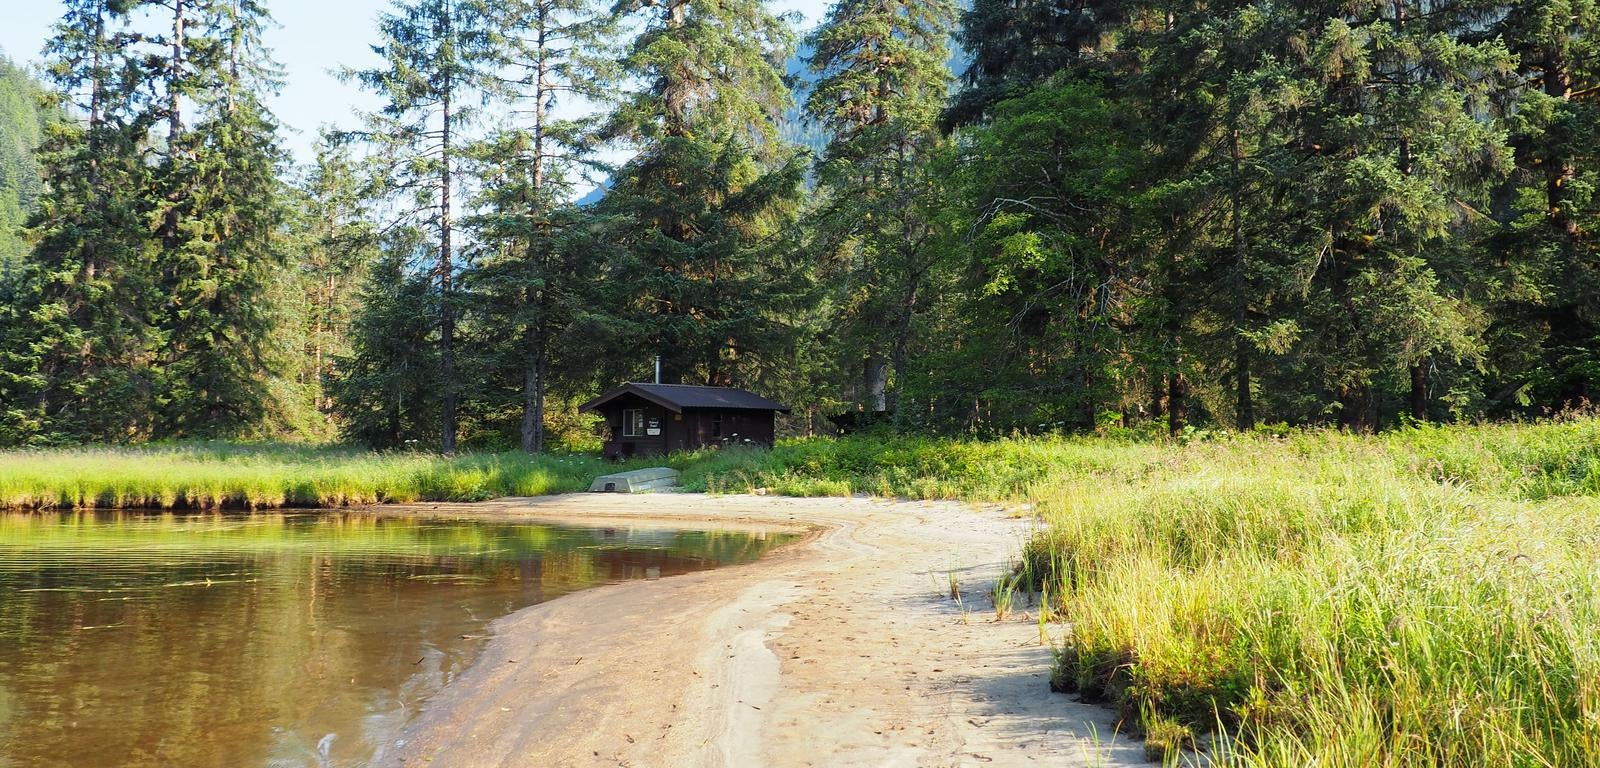 Marten Lake Cabin with trees surrounding it and water in front with a small boat and tall grass



Marten Lake Cabin exterior scenery

Credit: USFS